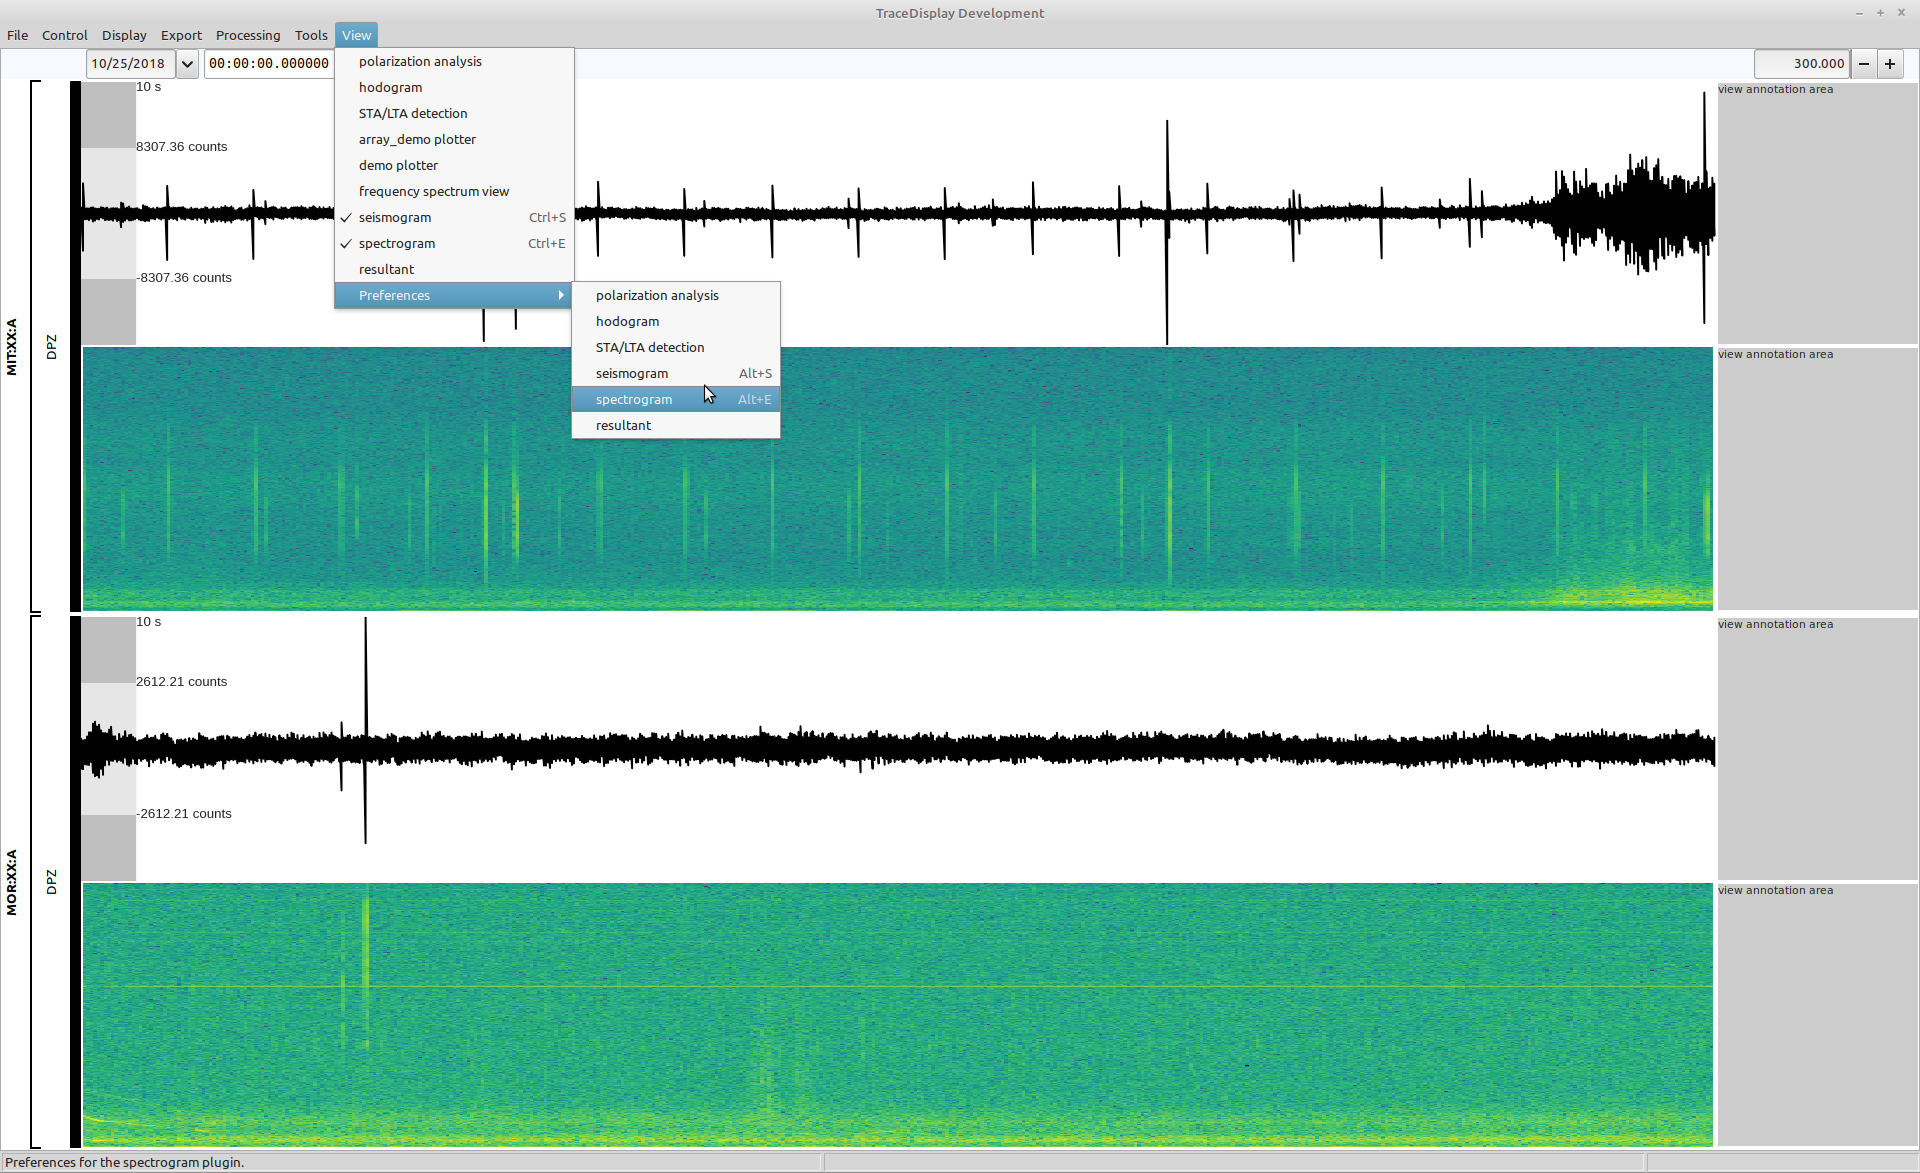 Open the spectrogram view preferences using the related submenu in the View menu.